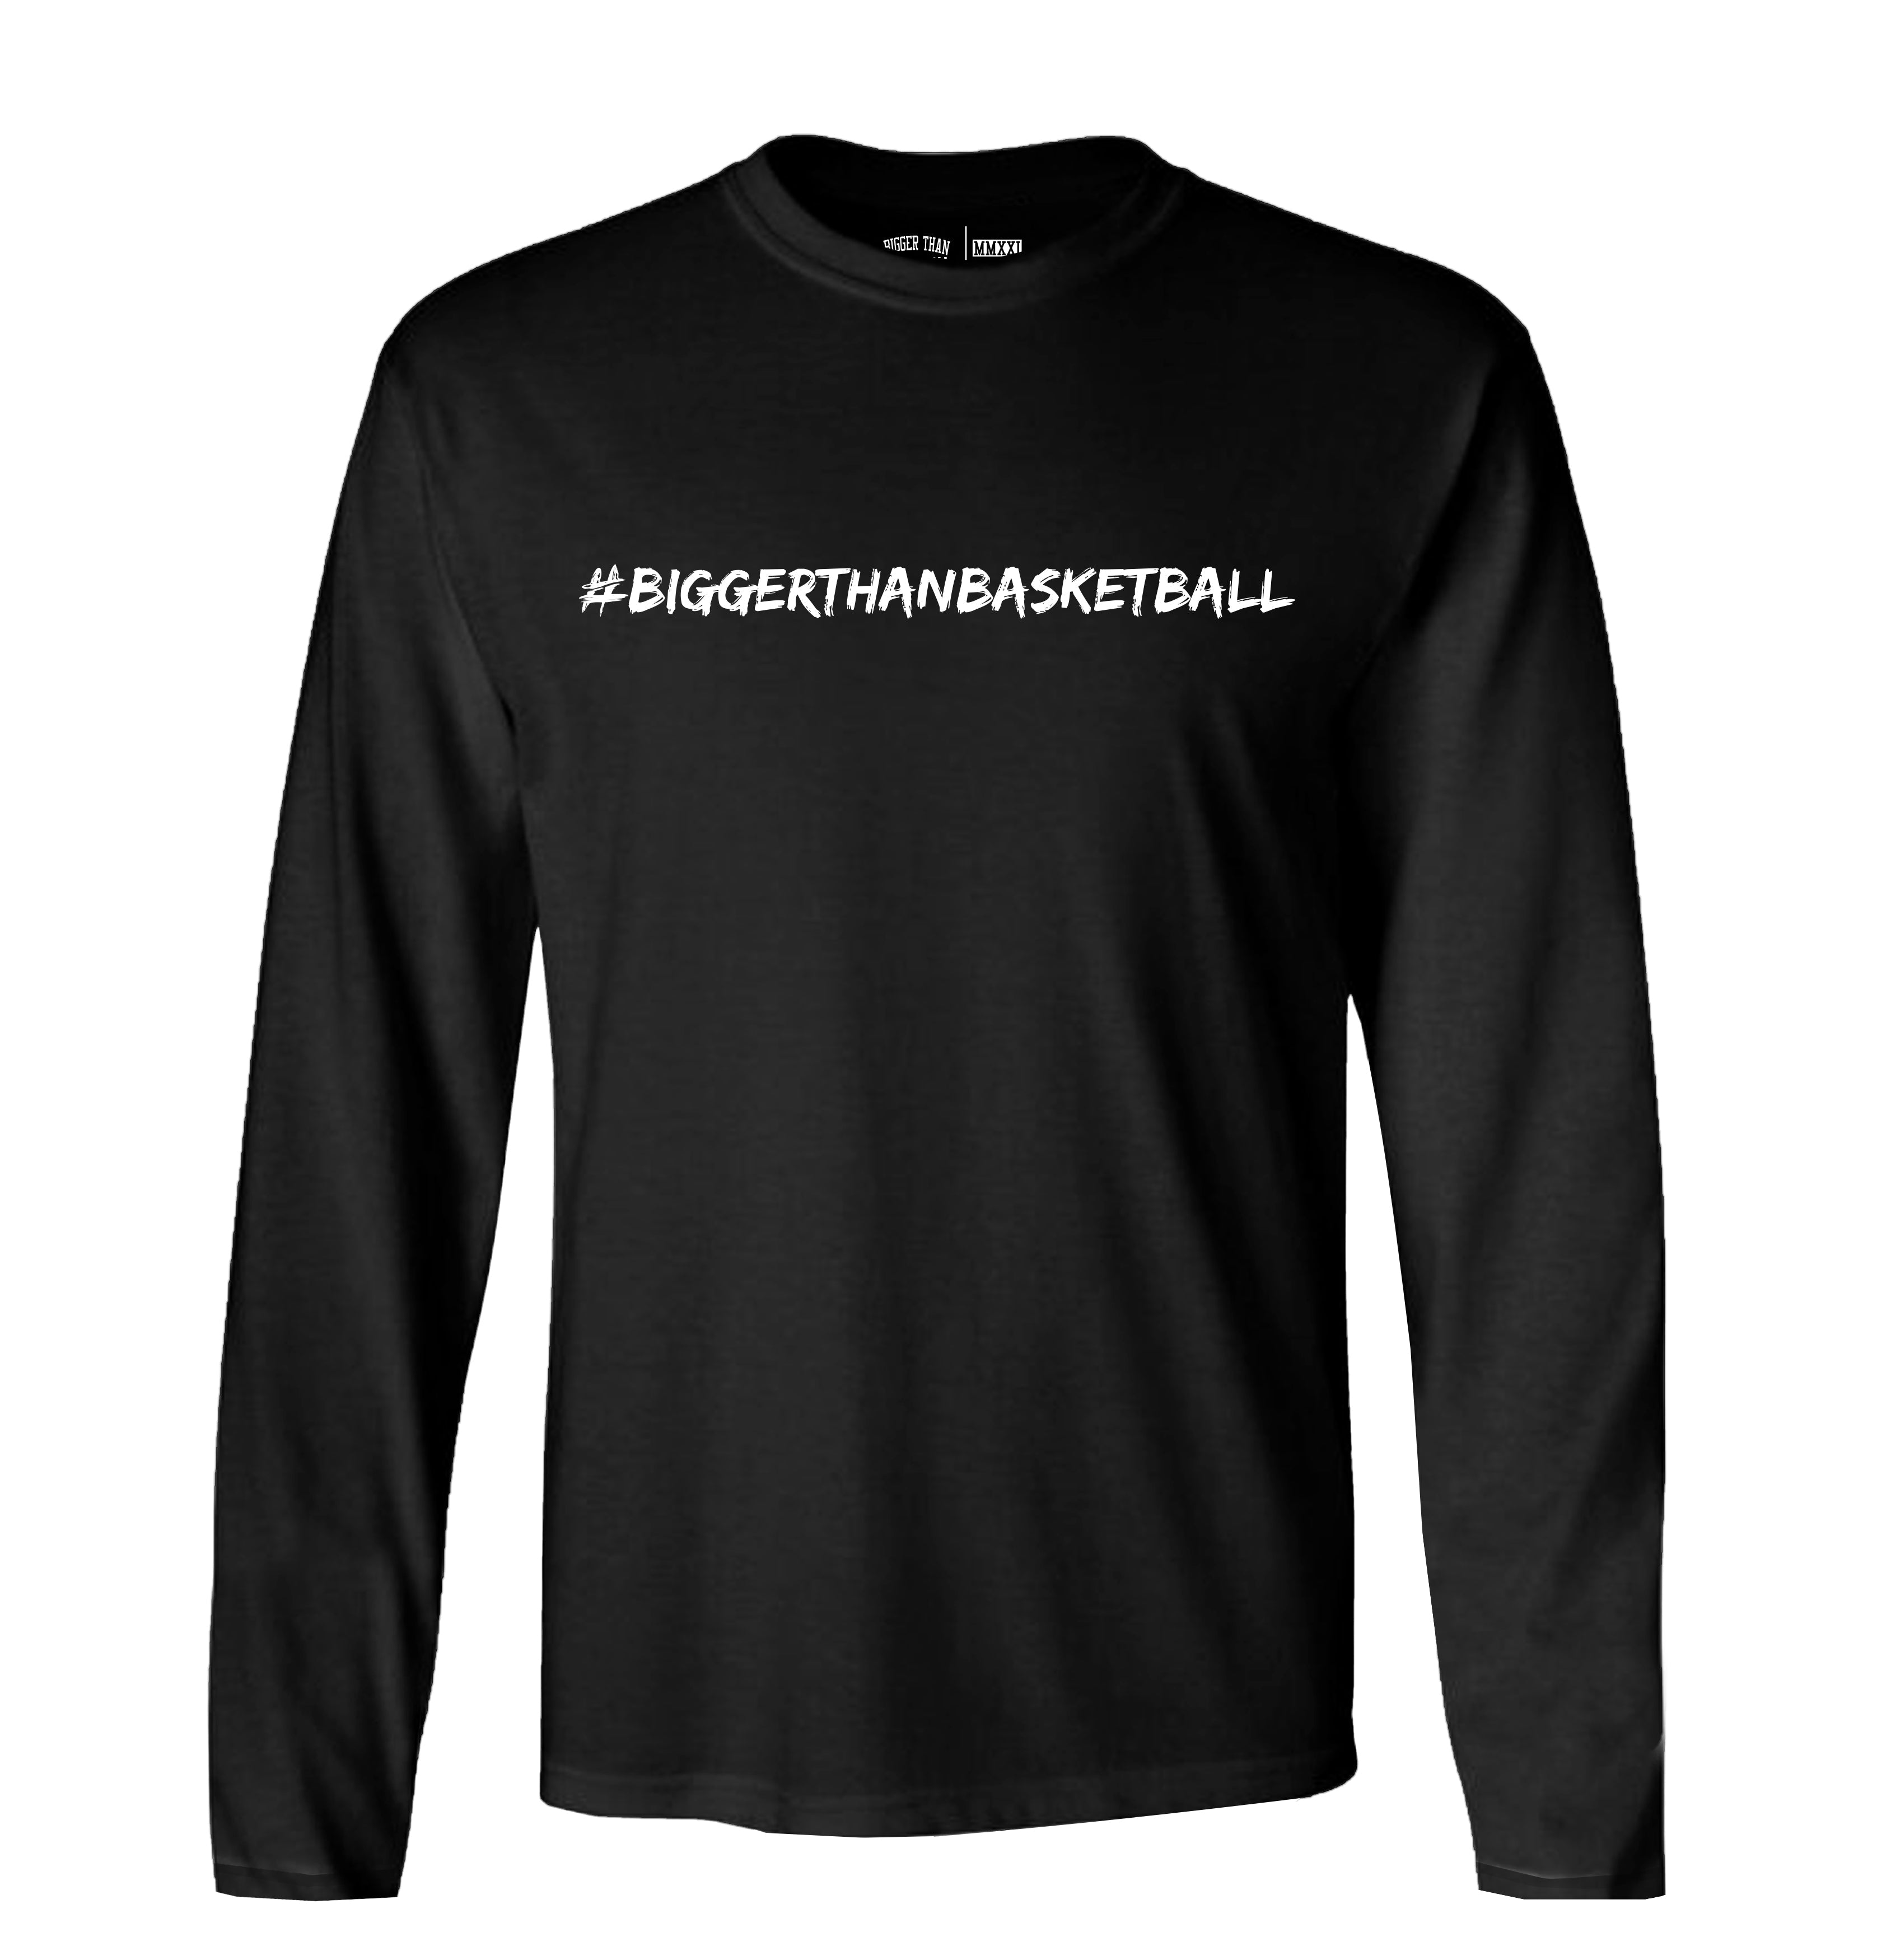 More Than A Game - Long Sleeve - Black - Youth